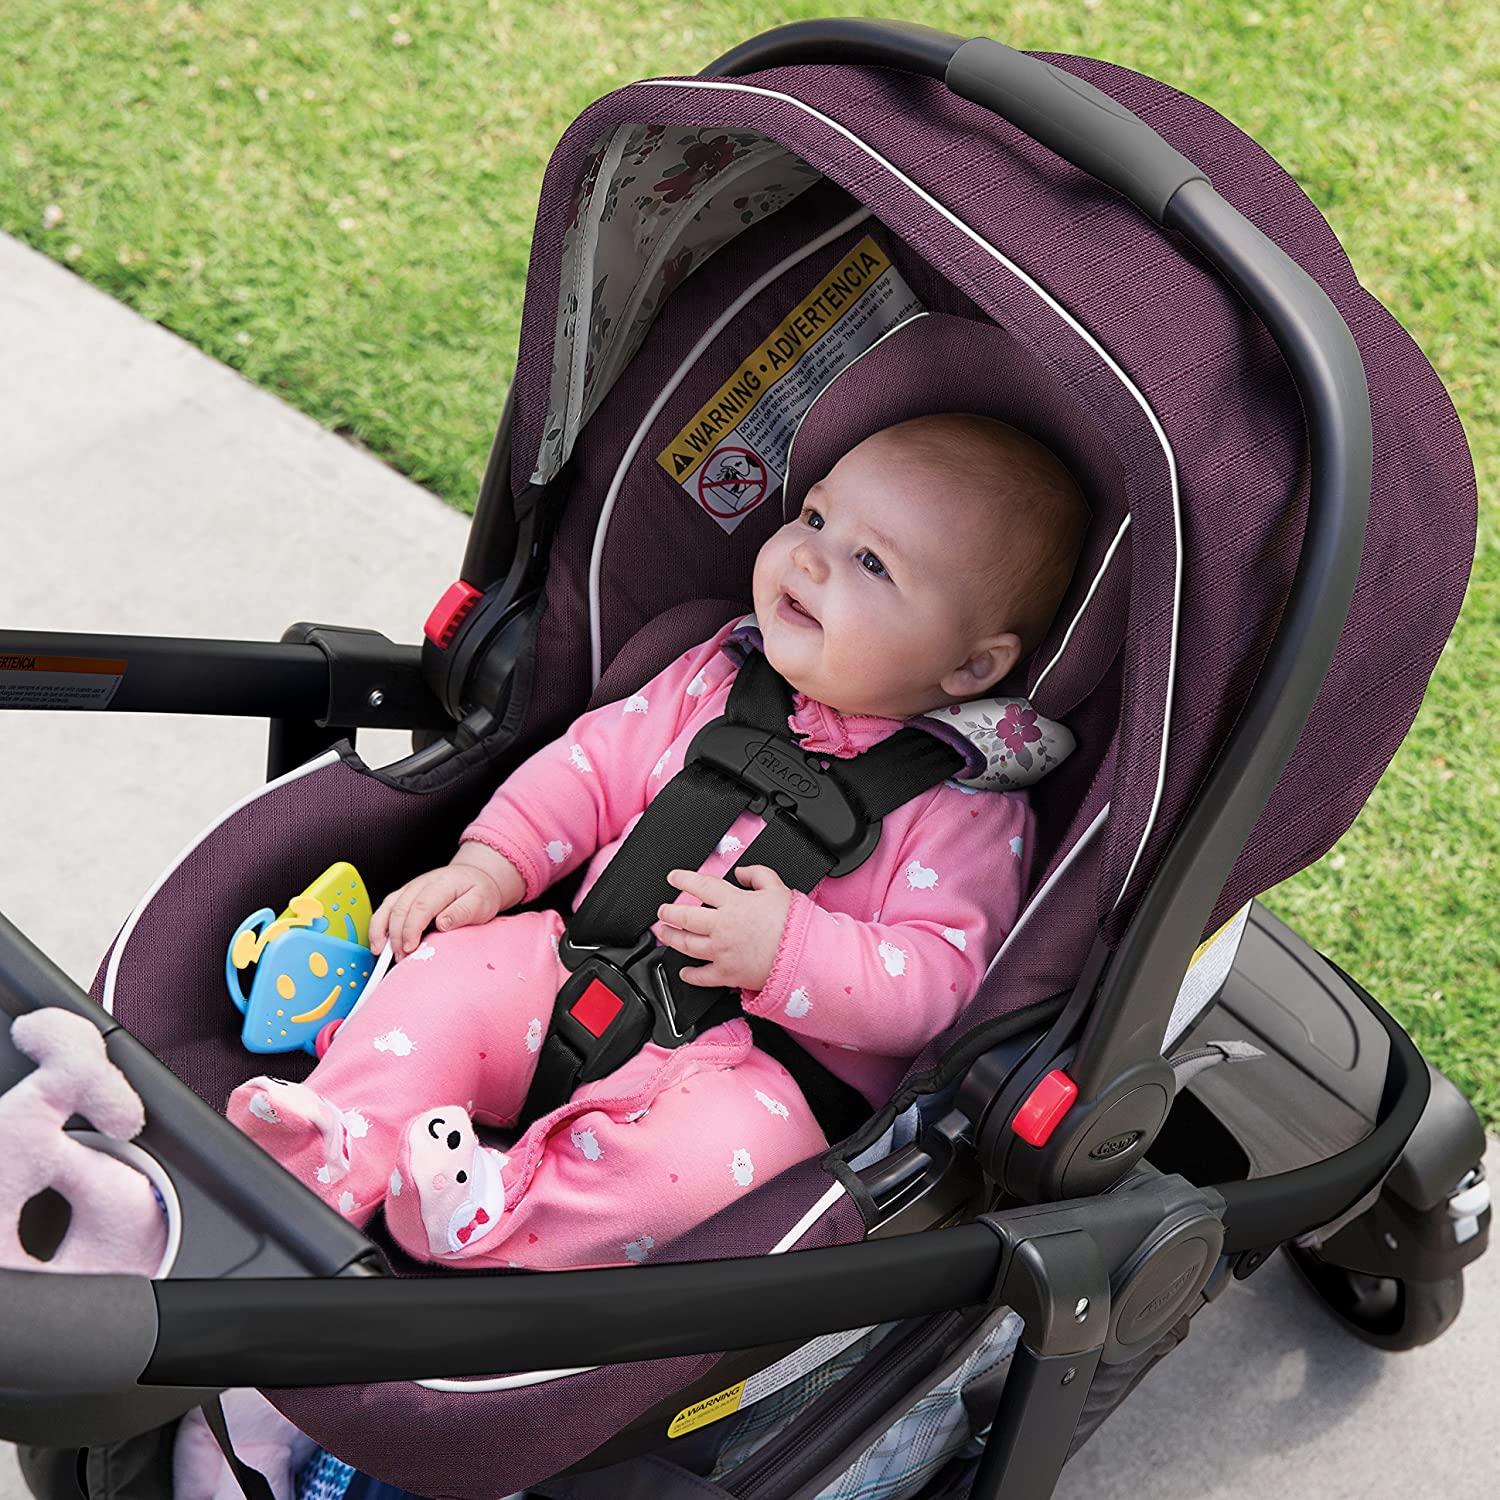 Graco Modes Travel System Includes Modes Stroller and